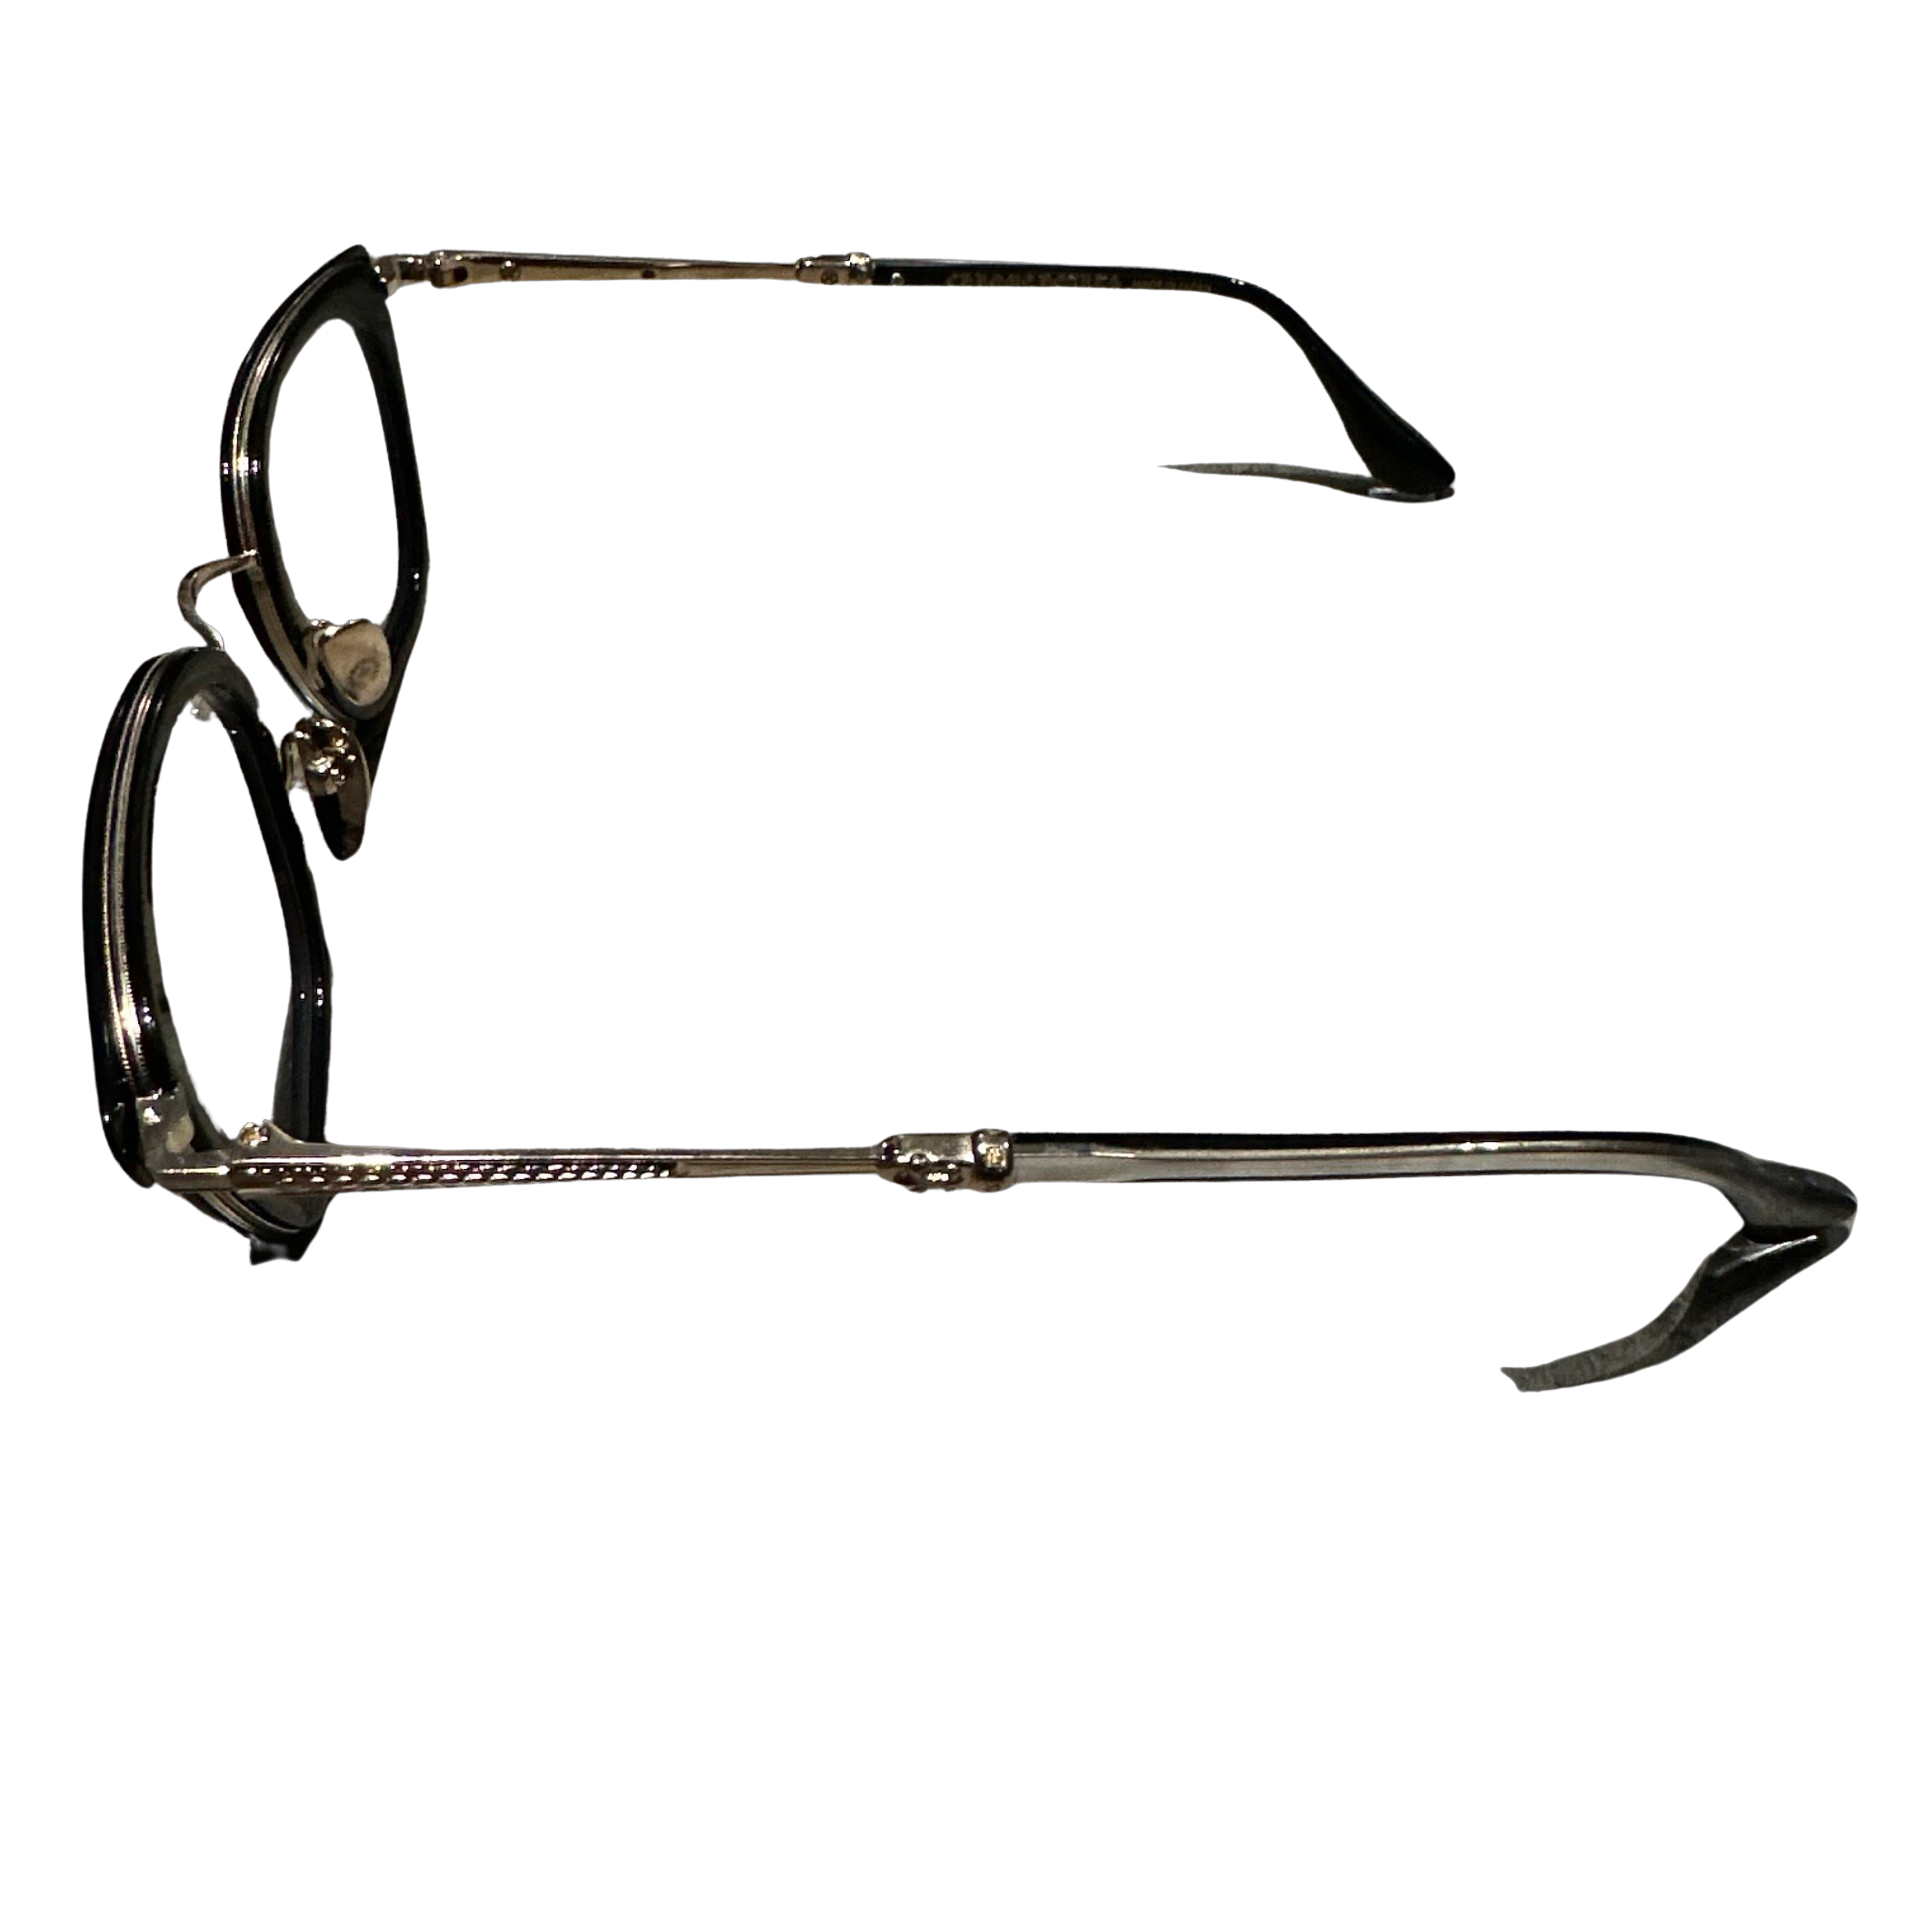 CHROME HEARTS STRAPADICTOME BLACK/GOLD PLATED GLASSES